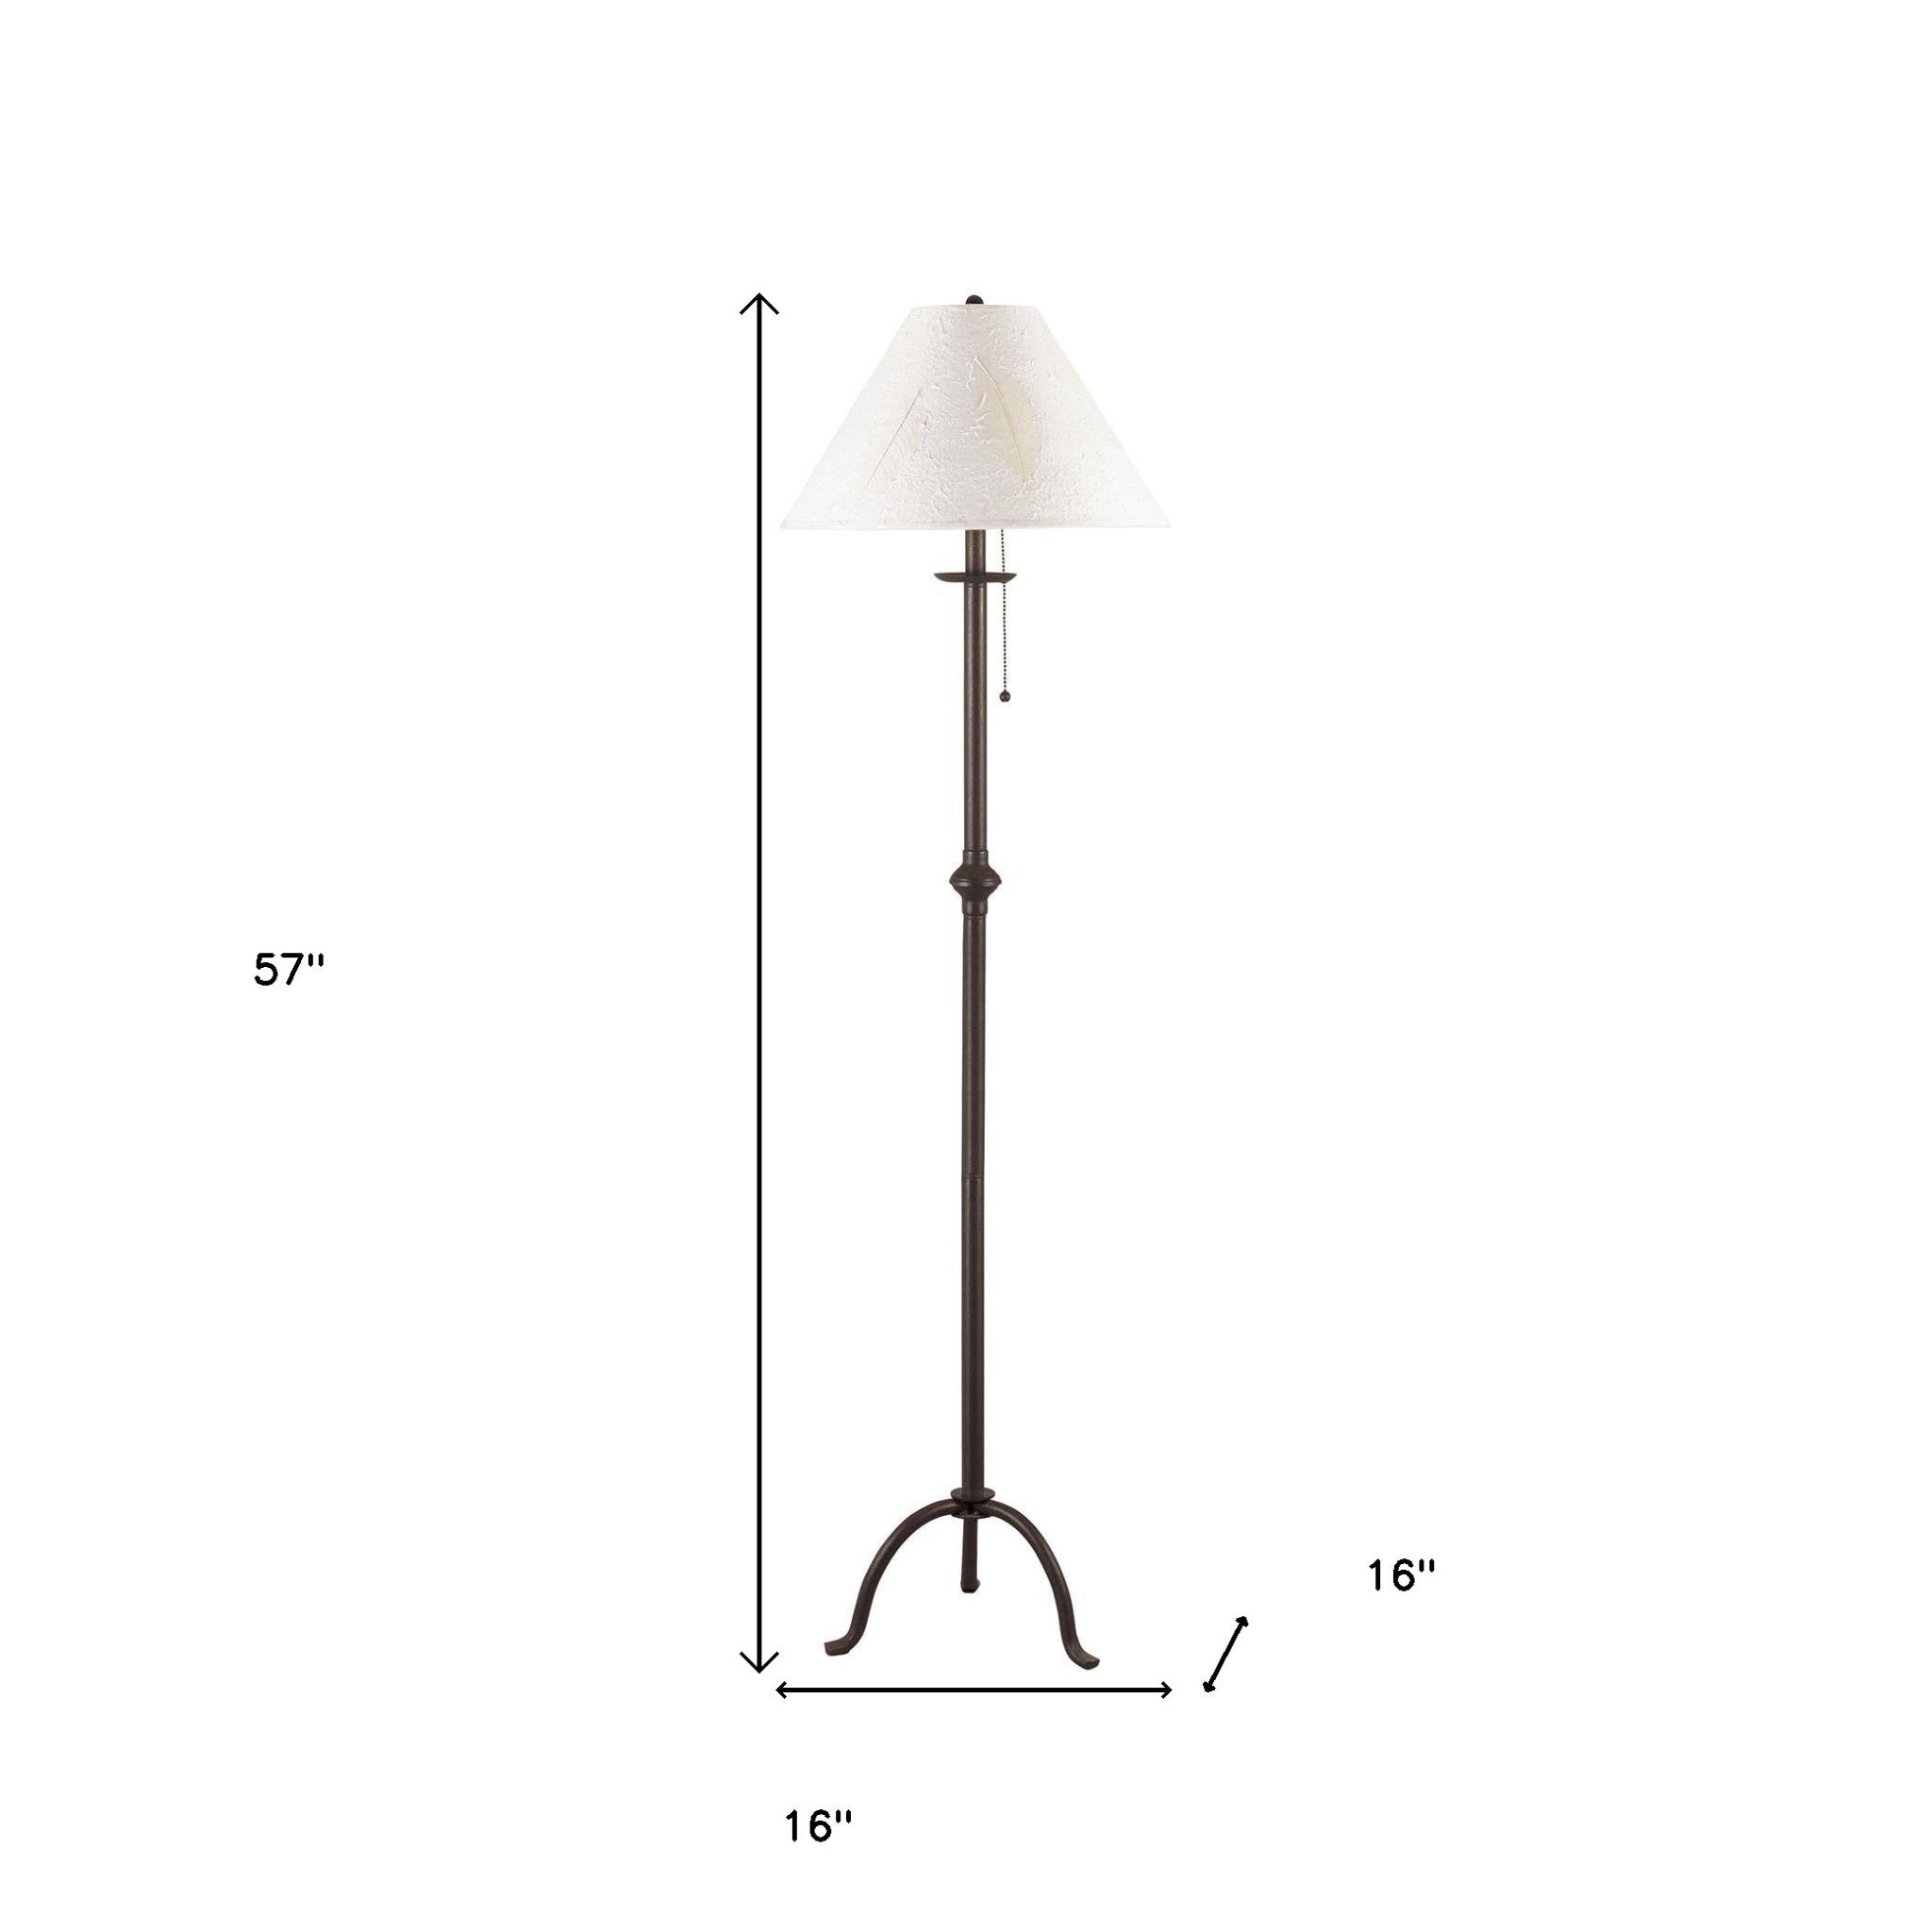 57" Black Traditional Shaped Floor Lamp With White Empire Shade